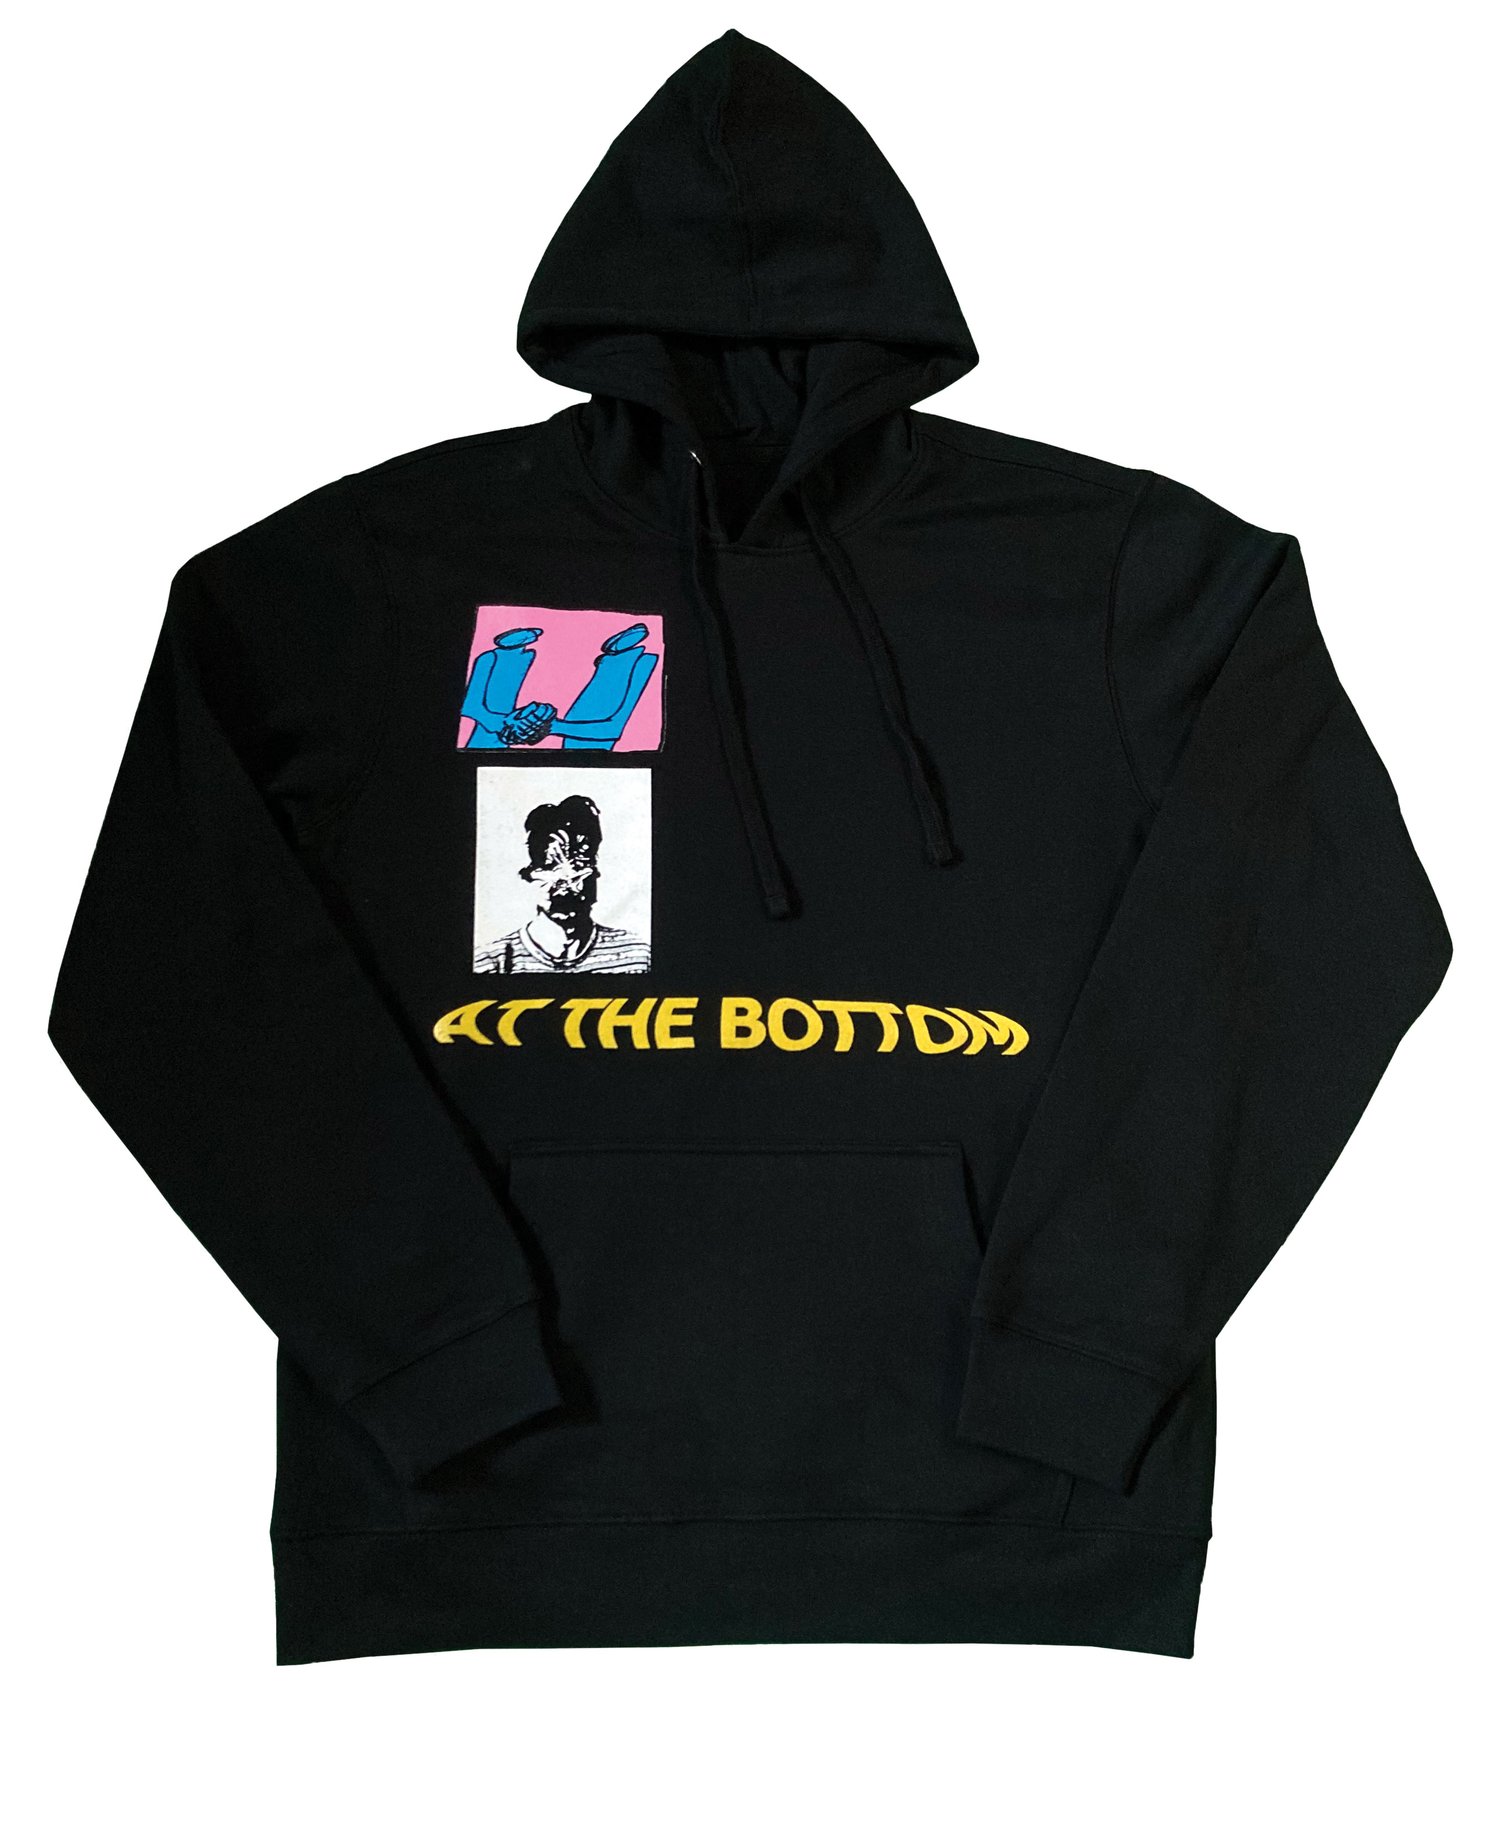 new atb hoody all sizes available